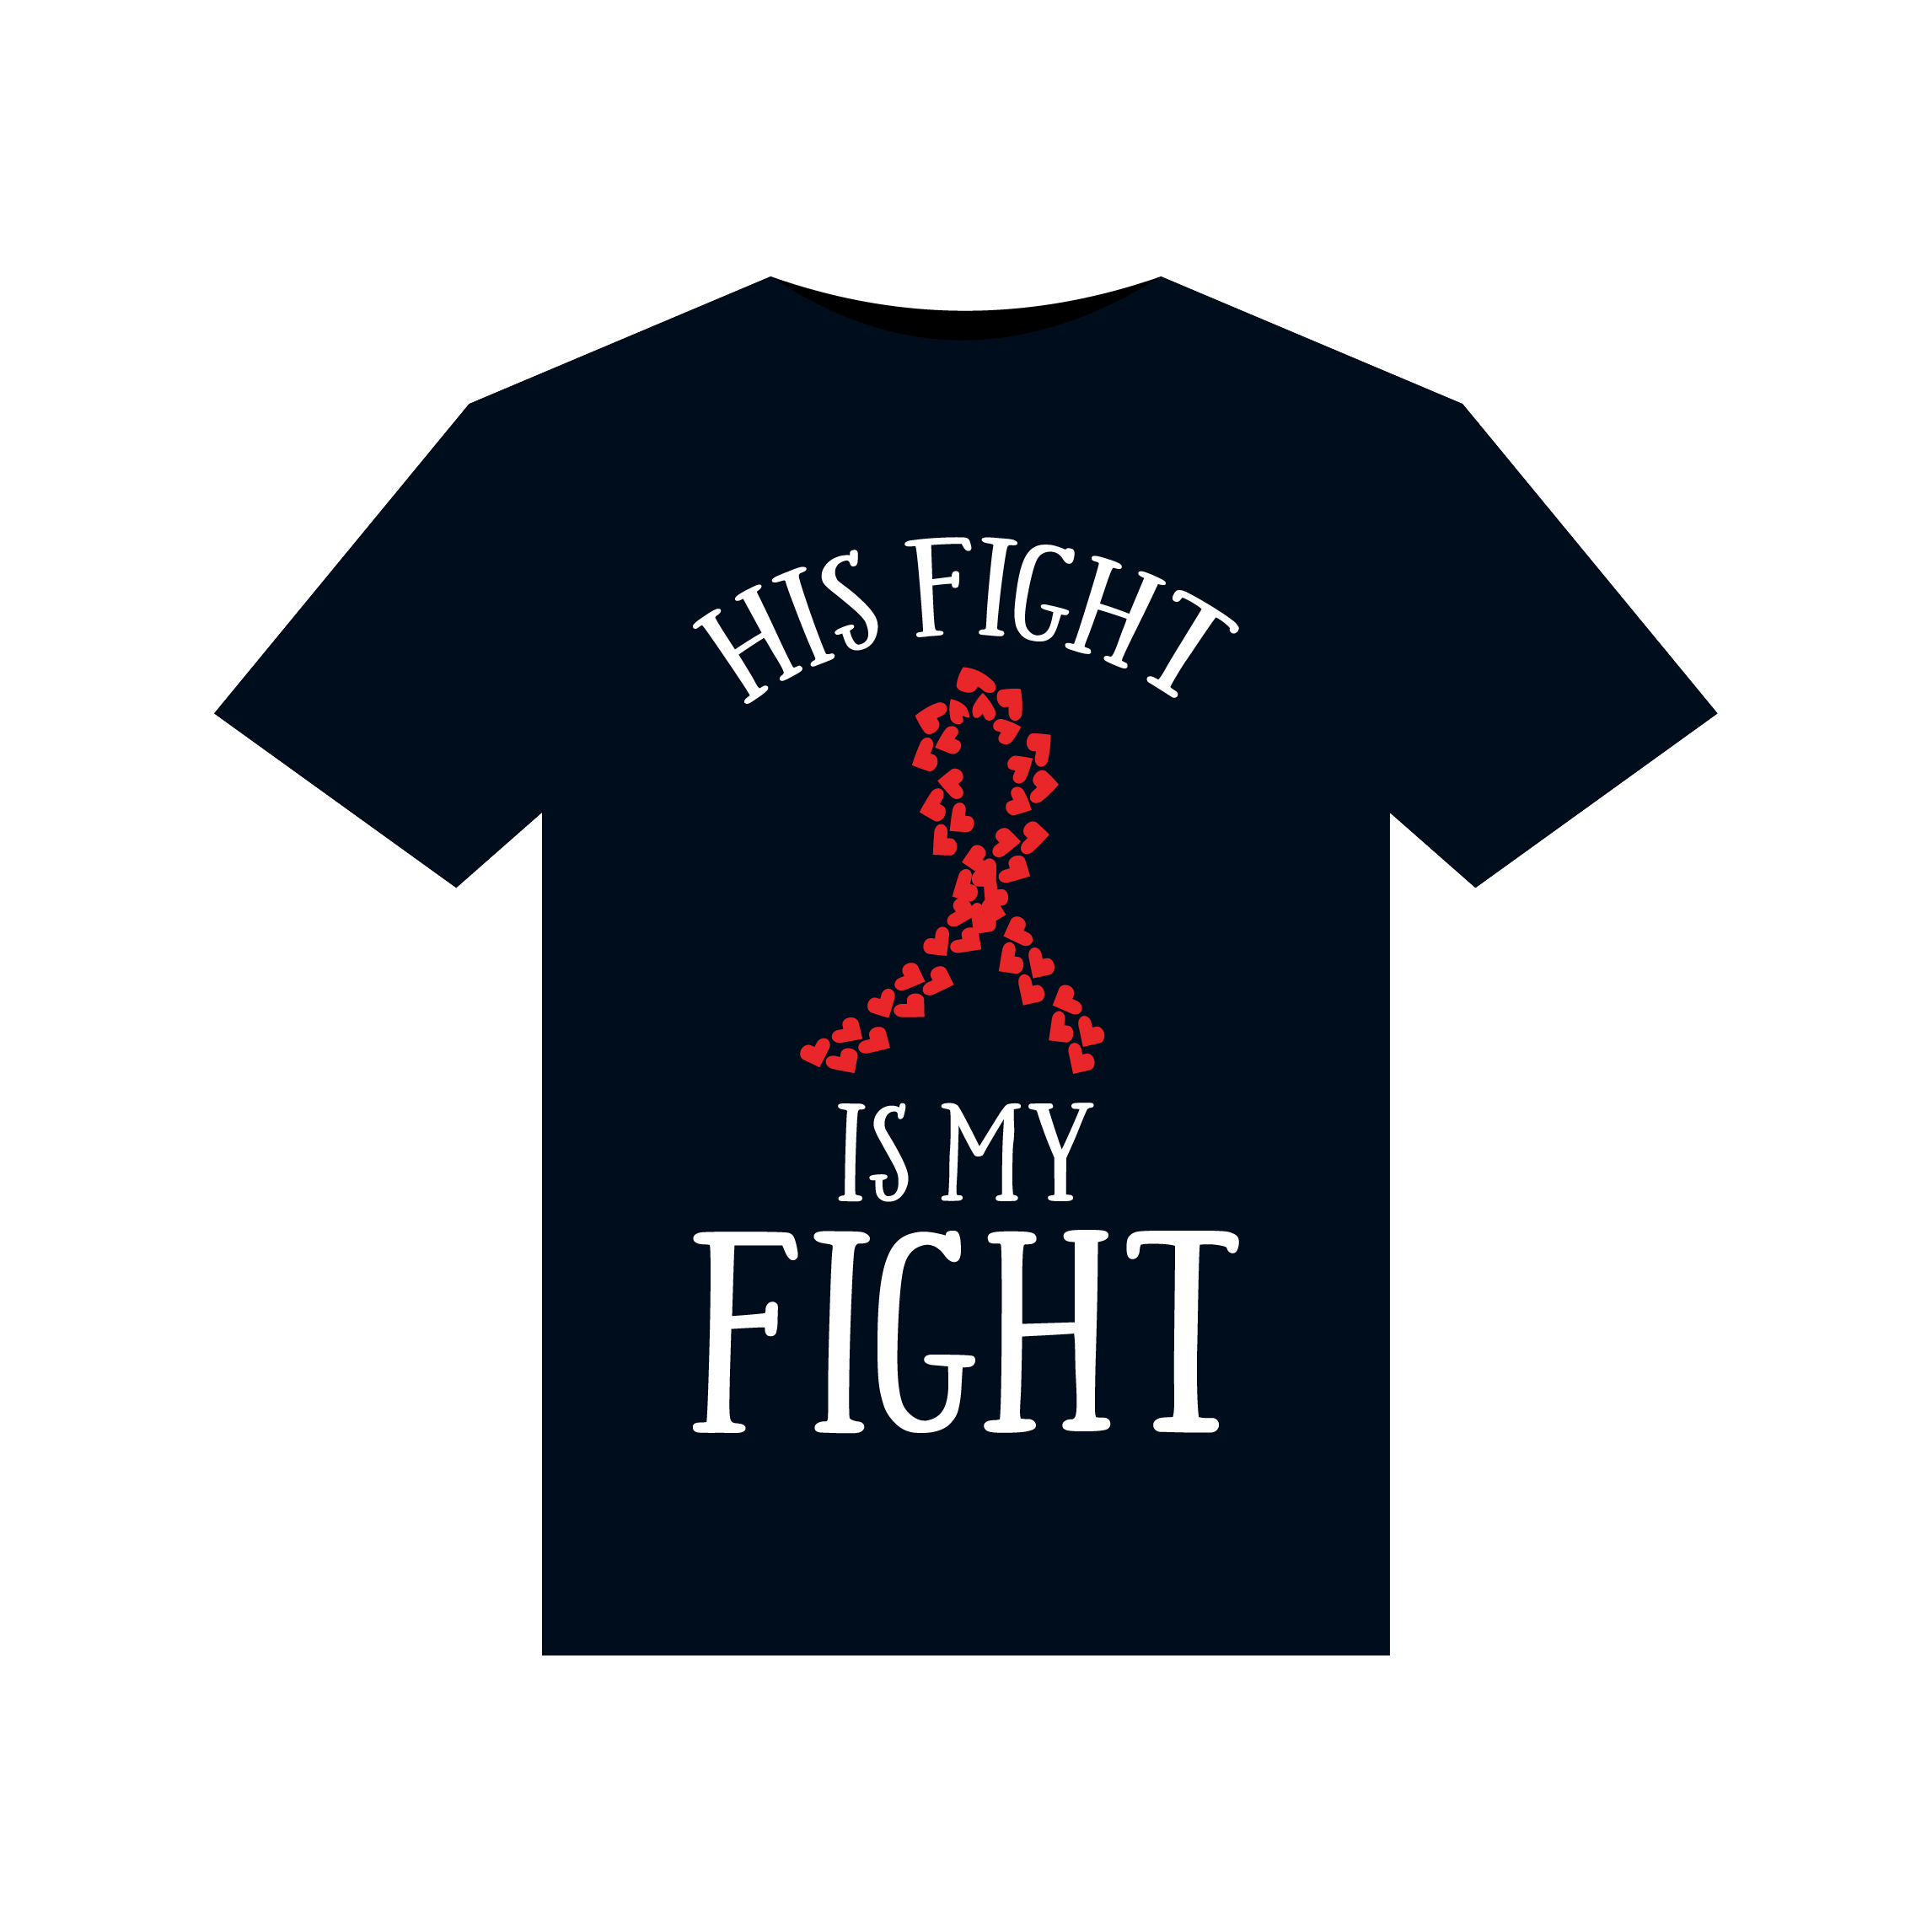 His Fight Is My Fight illustrations for print-ready T-Shirts design cover image.